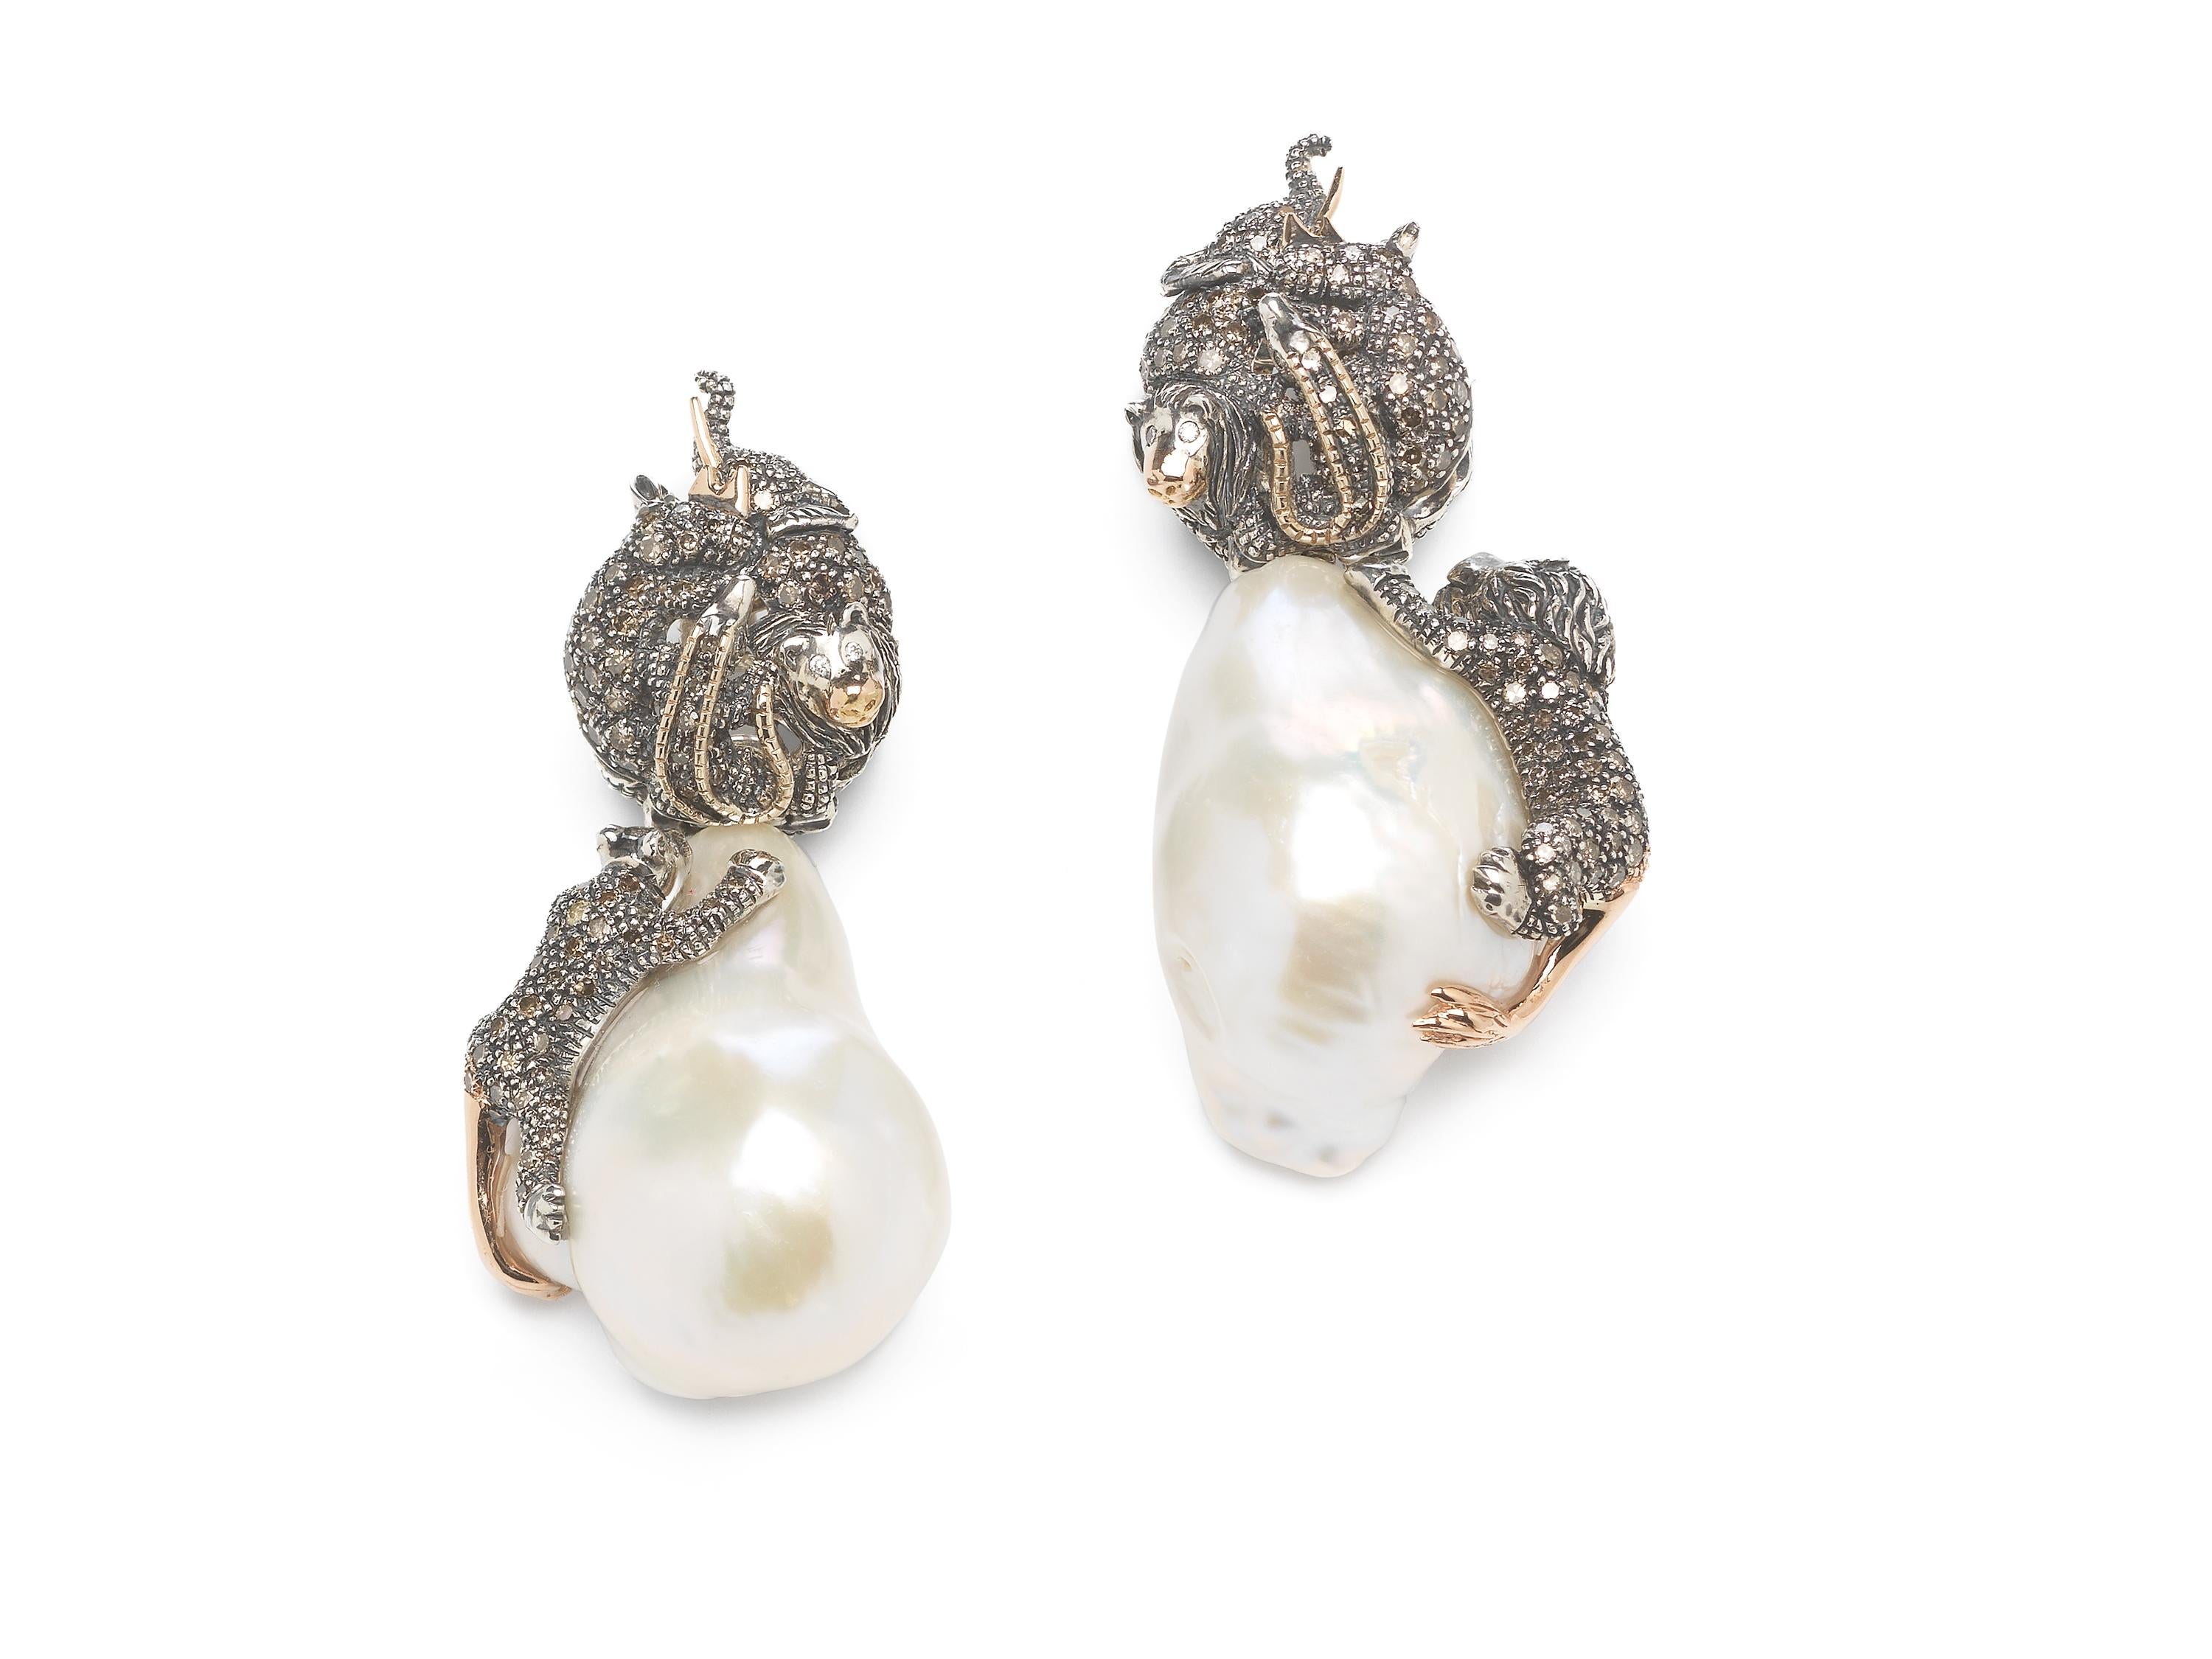 Two beautiful baroque pearls are the focal point of these drop earrings, with the pearls set with animals that appear to crawl up their irregular surface. The animals shown here are male and female lions, but the creatures can be customised to